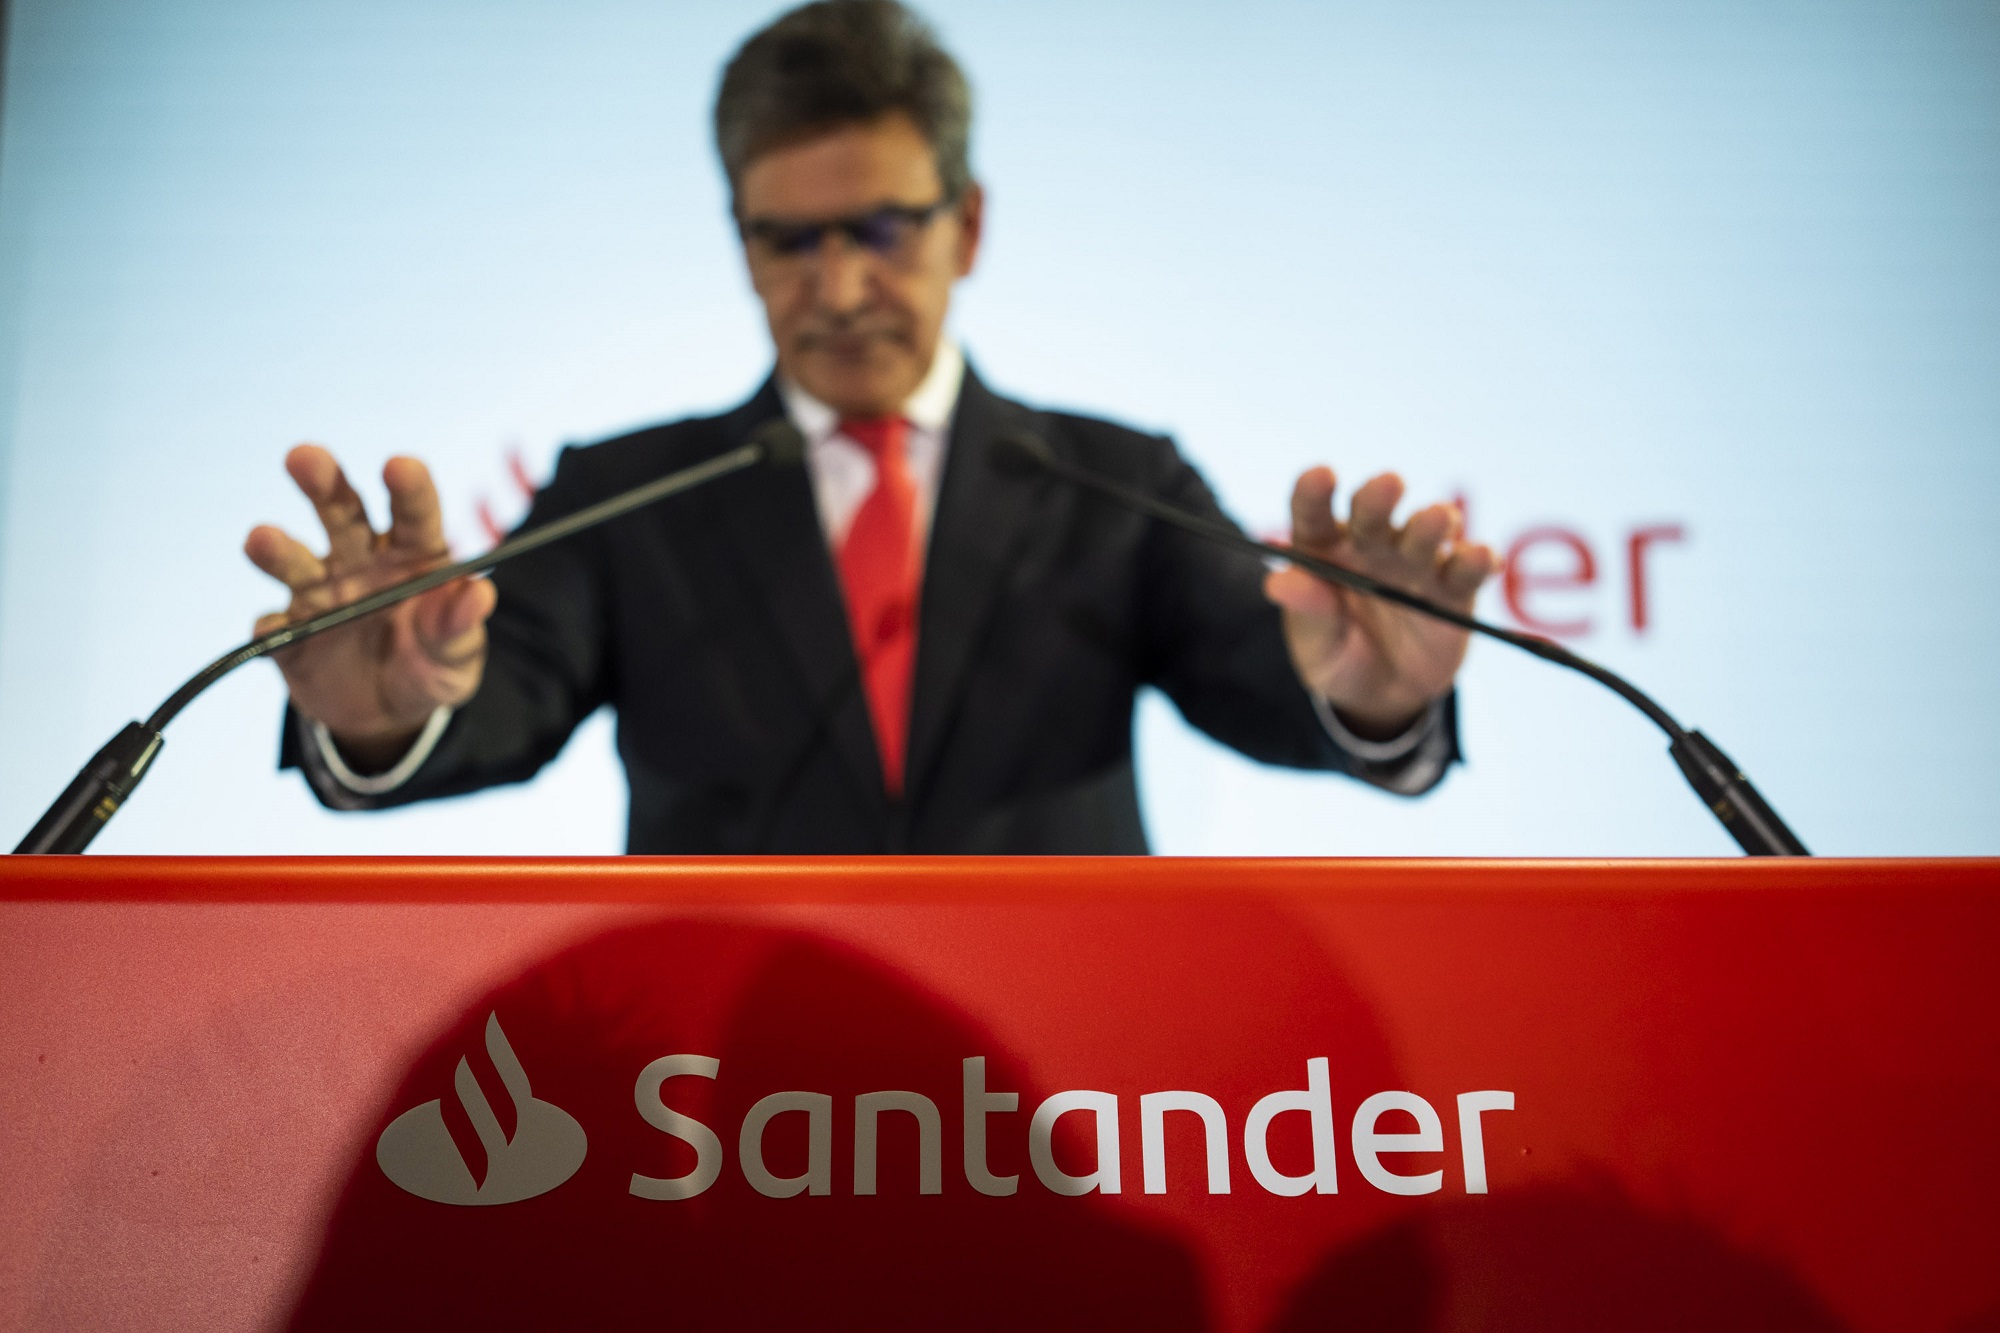 After the debacle around its new CEO, Santander isn't winning any friends among bond investors.